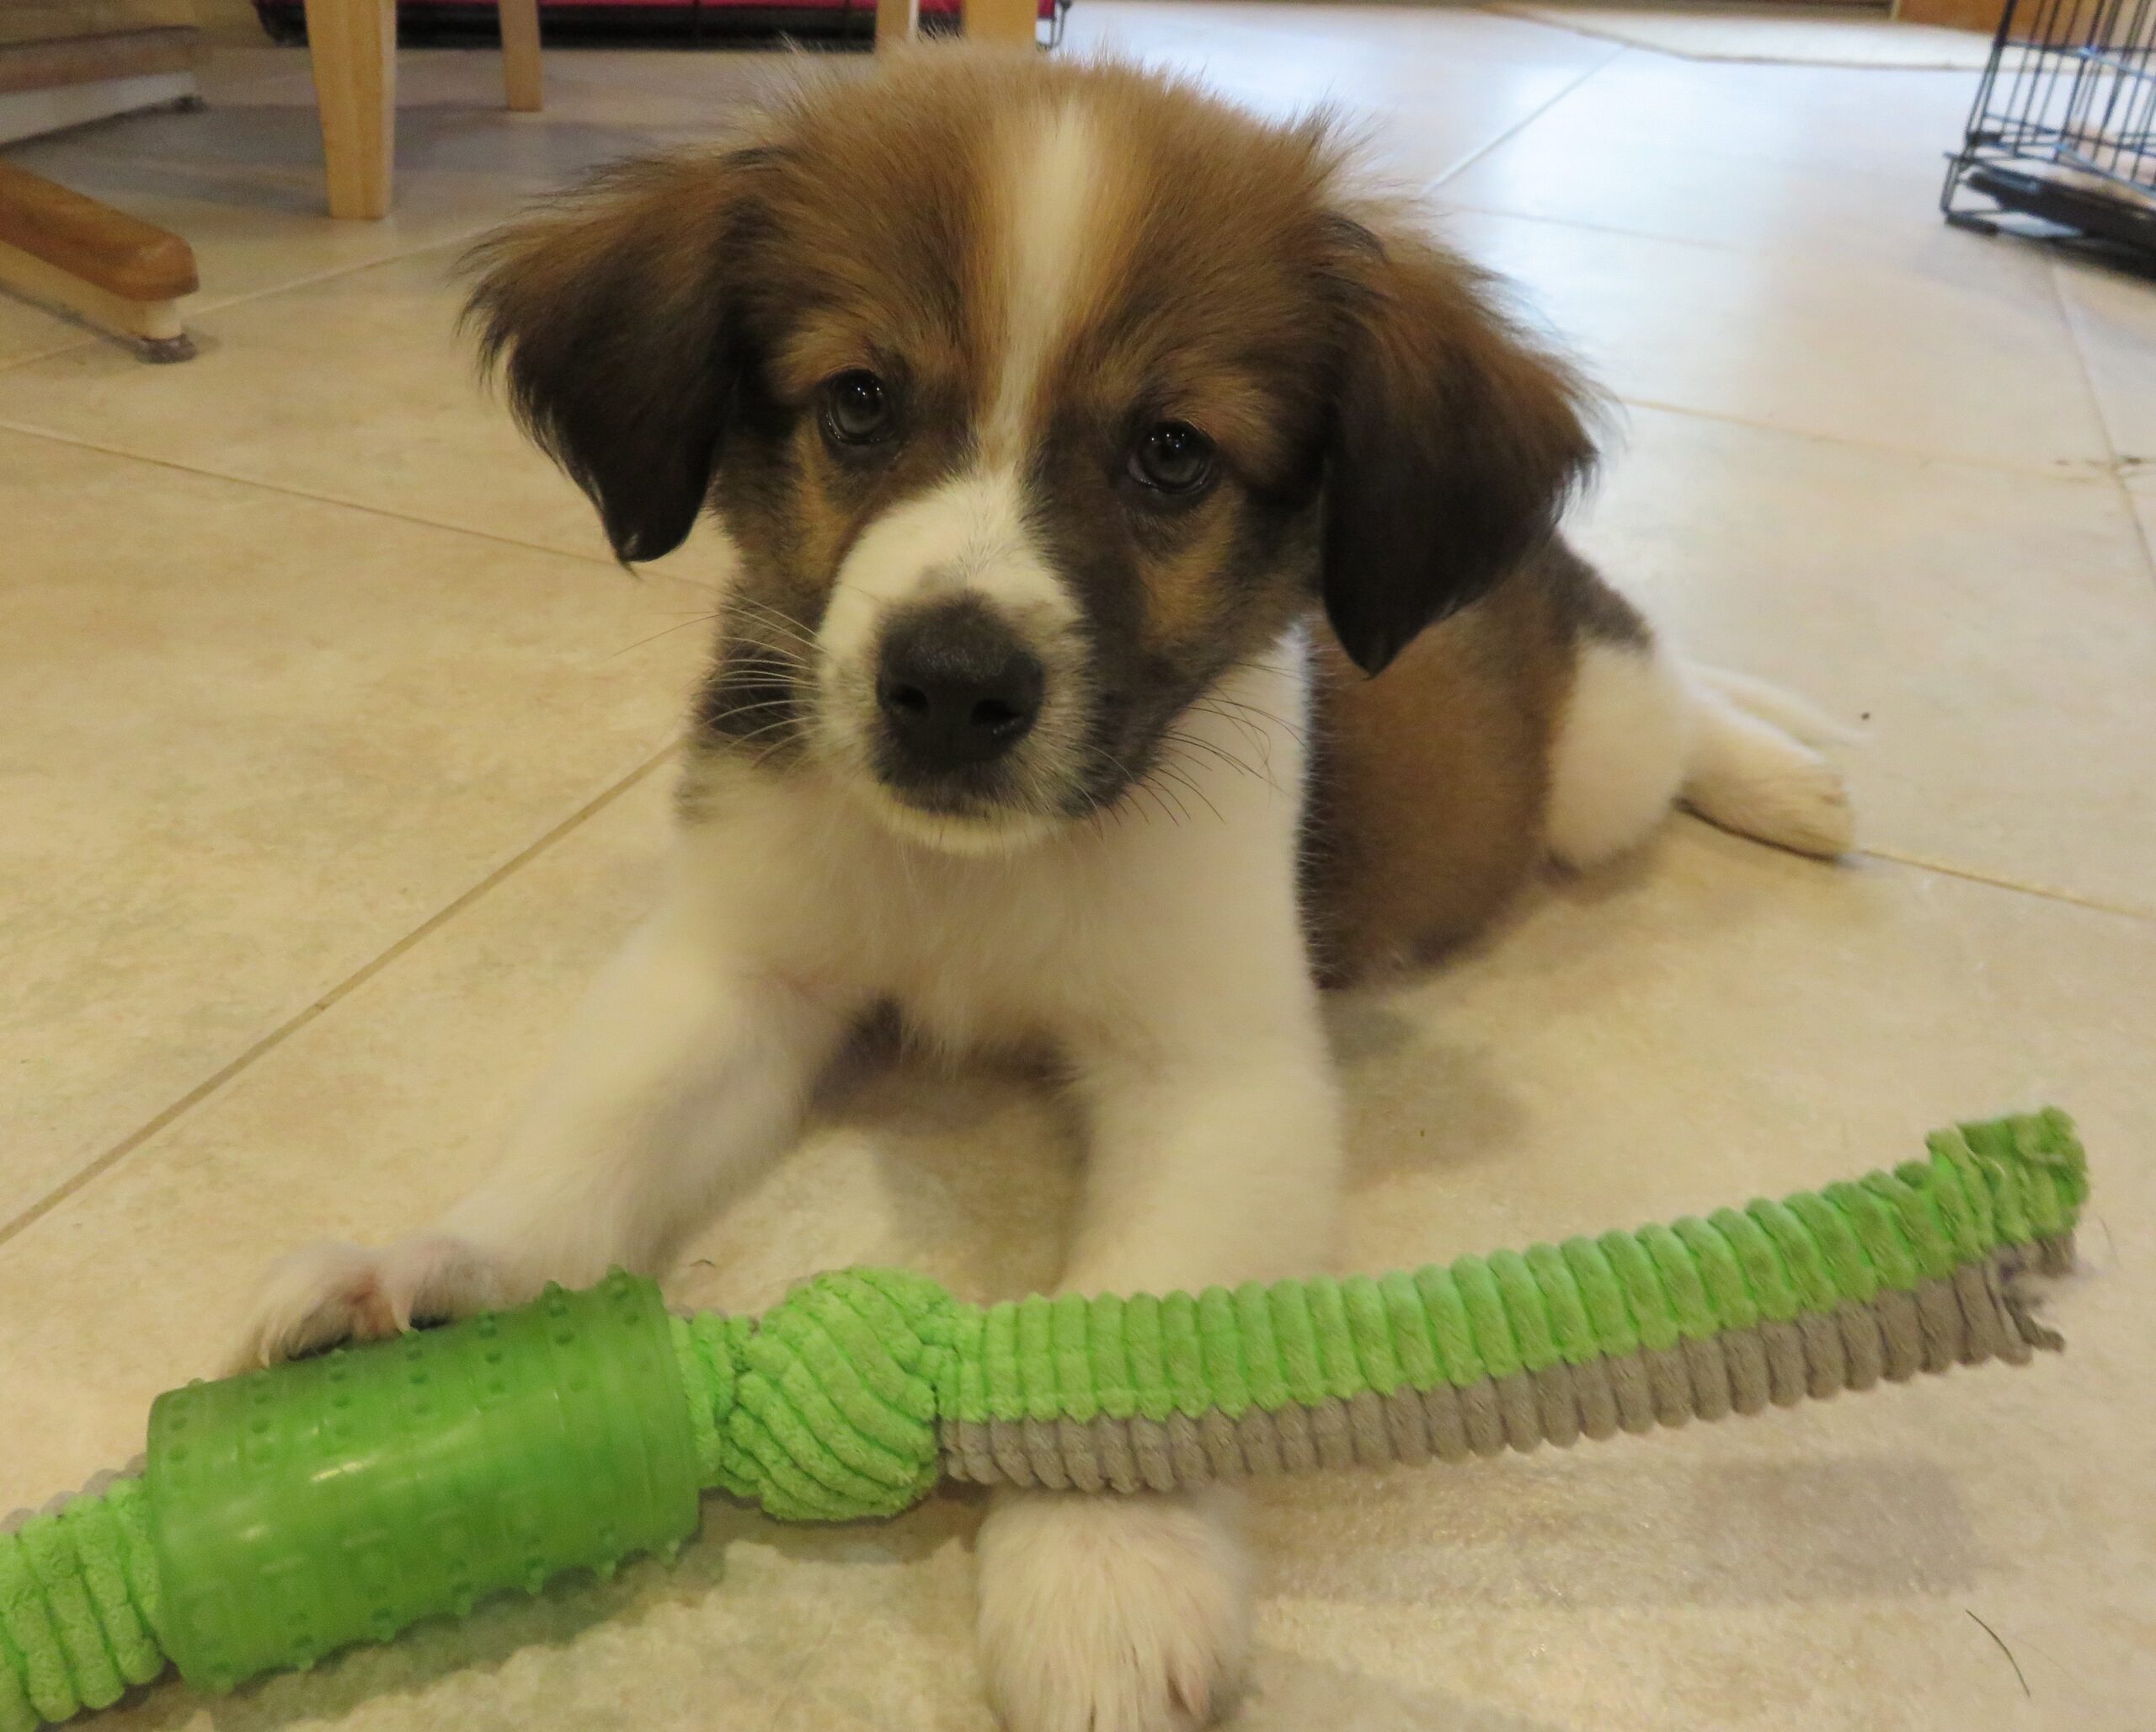 A small brown and white puppy plays with a chew toy